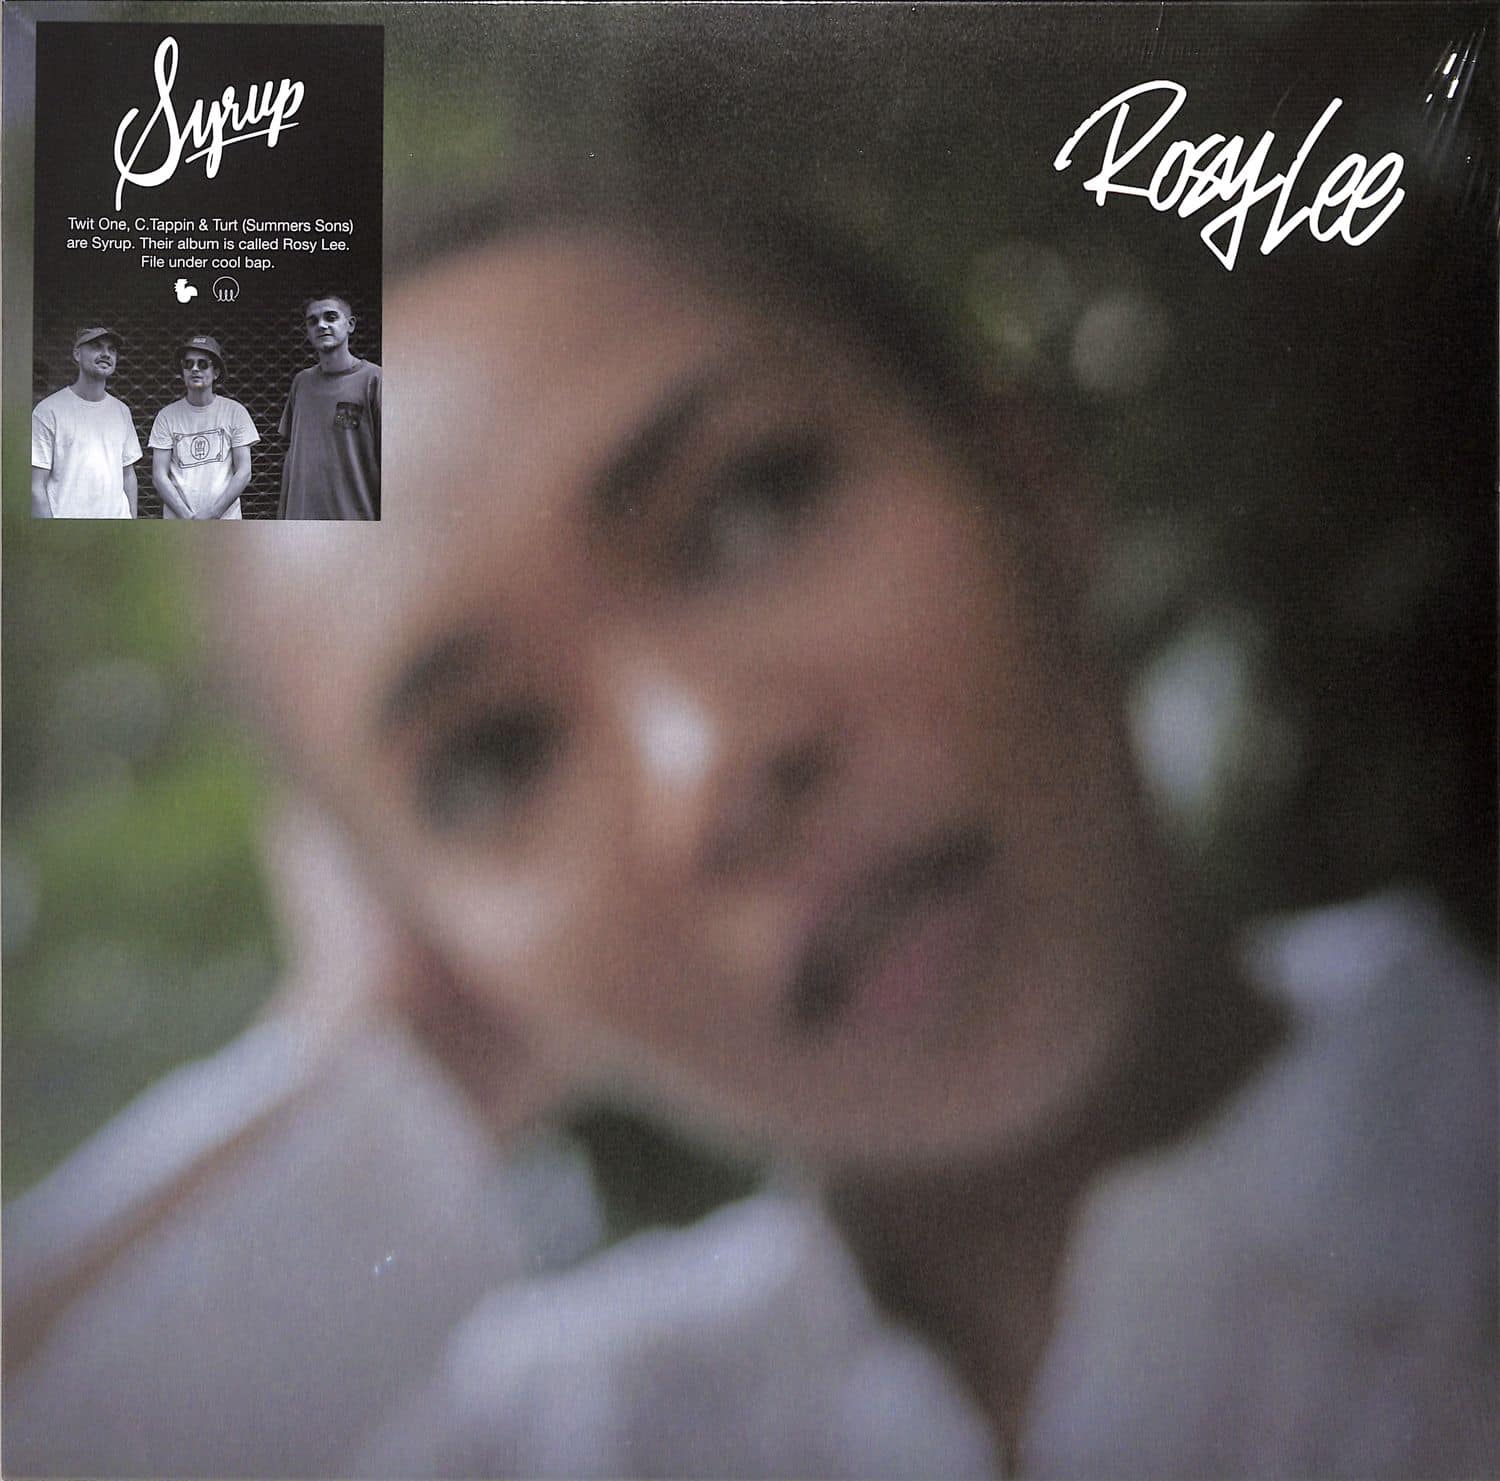 Syrup - ROSY LEE 